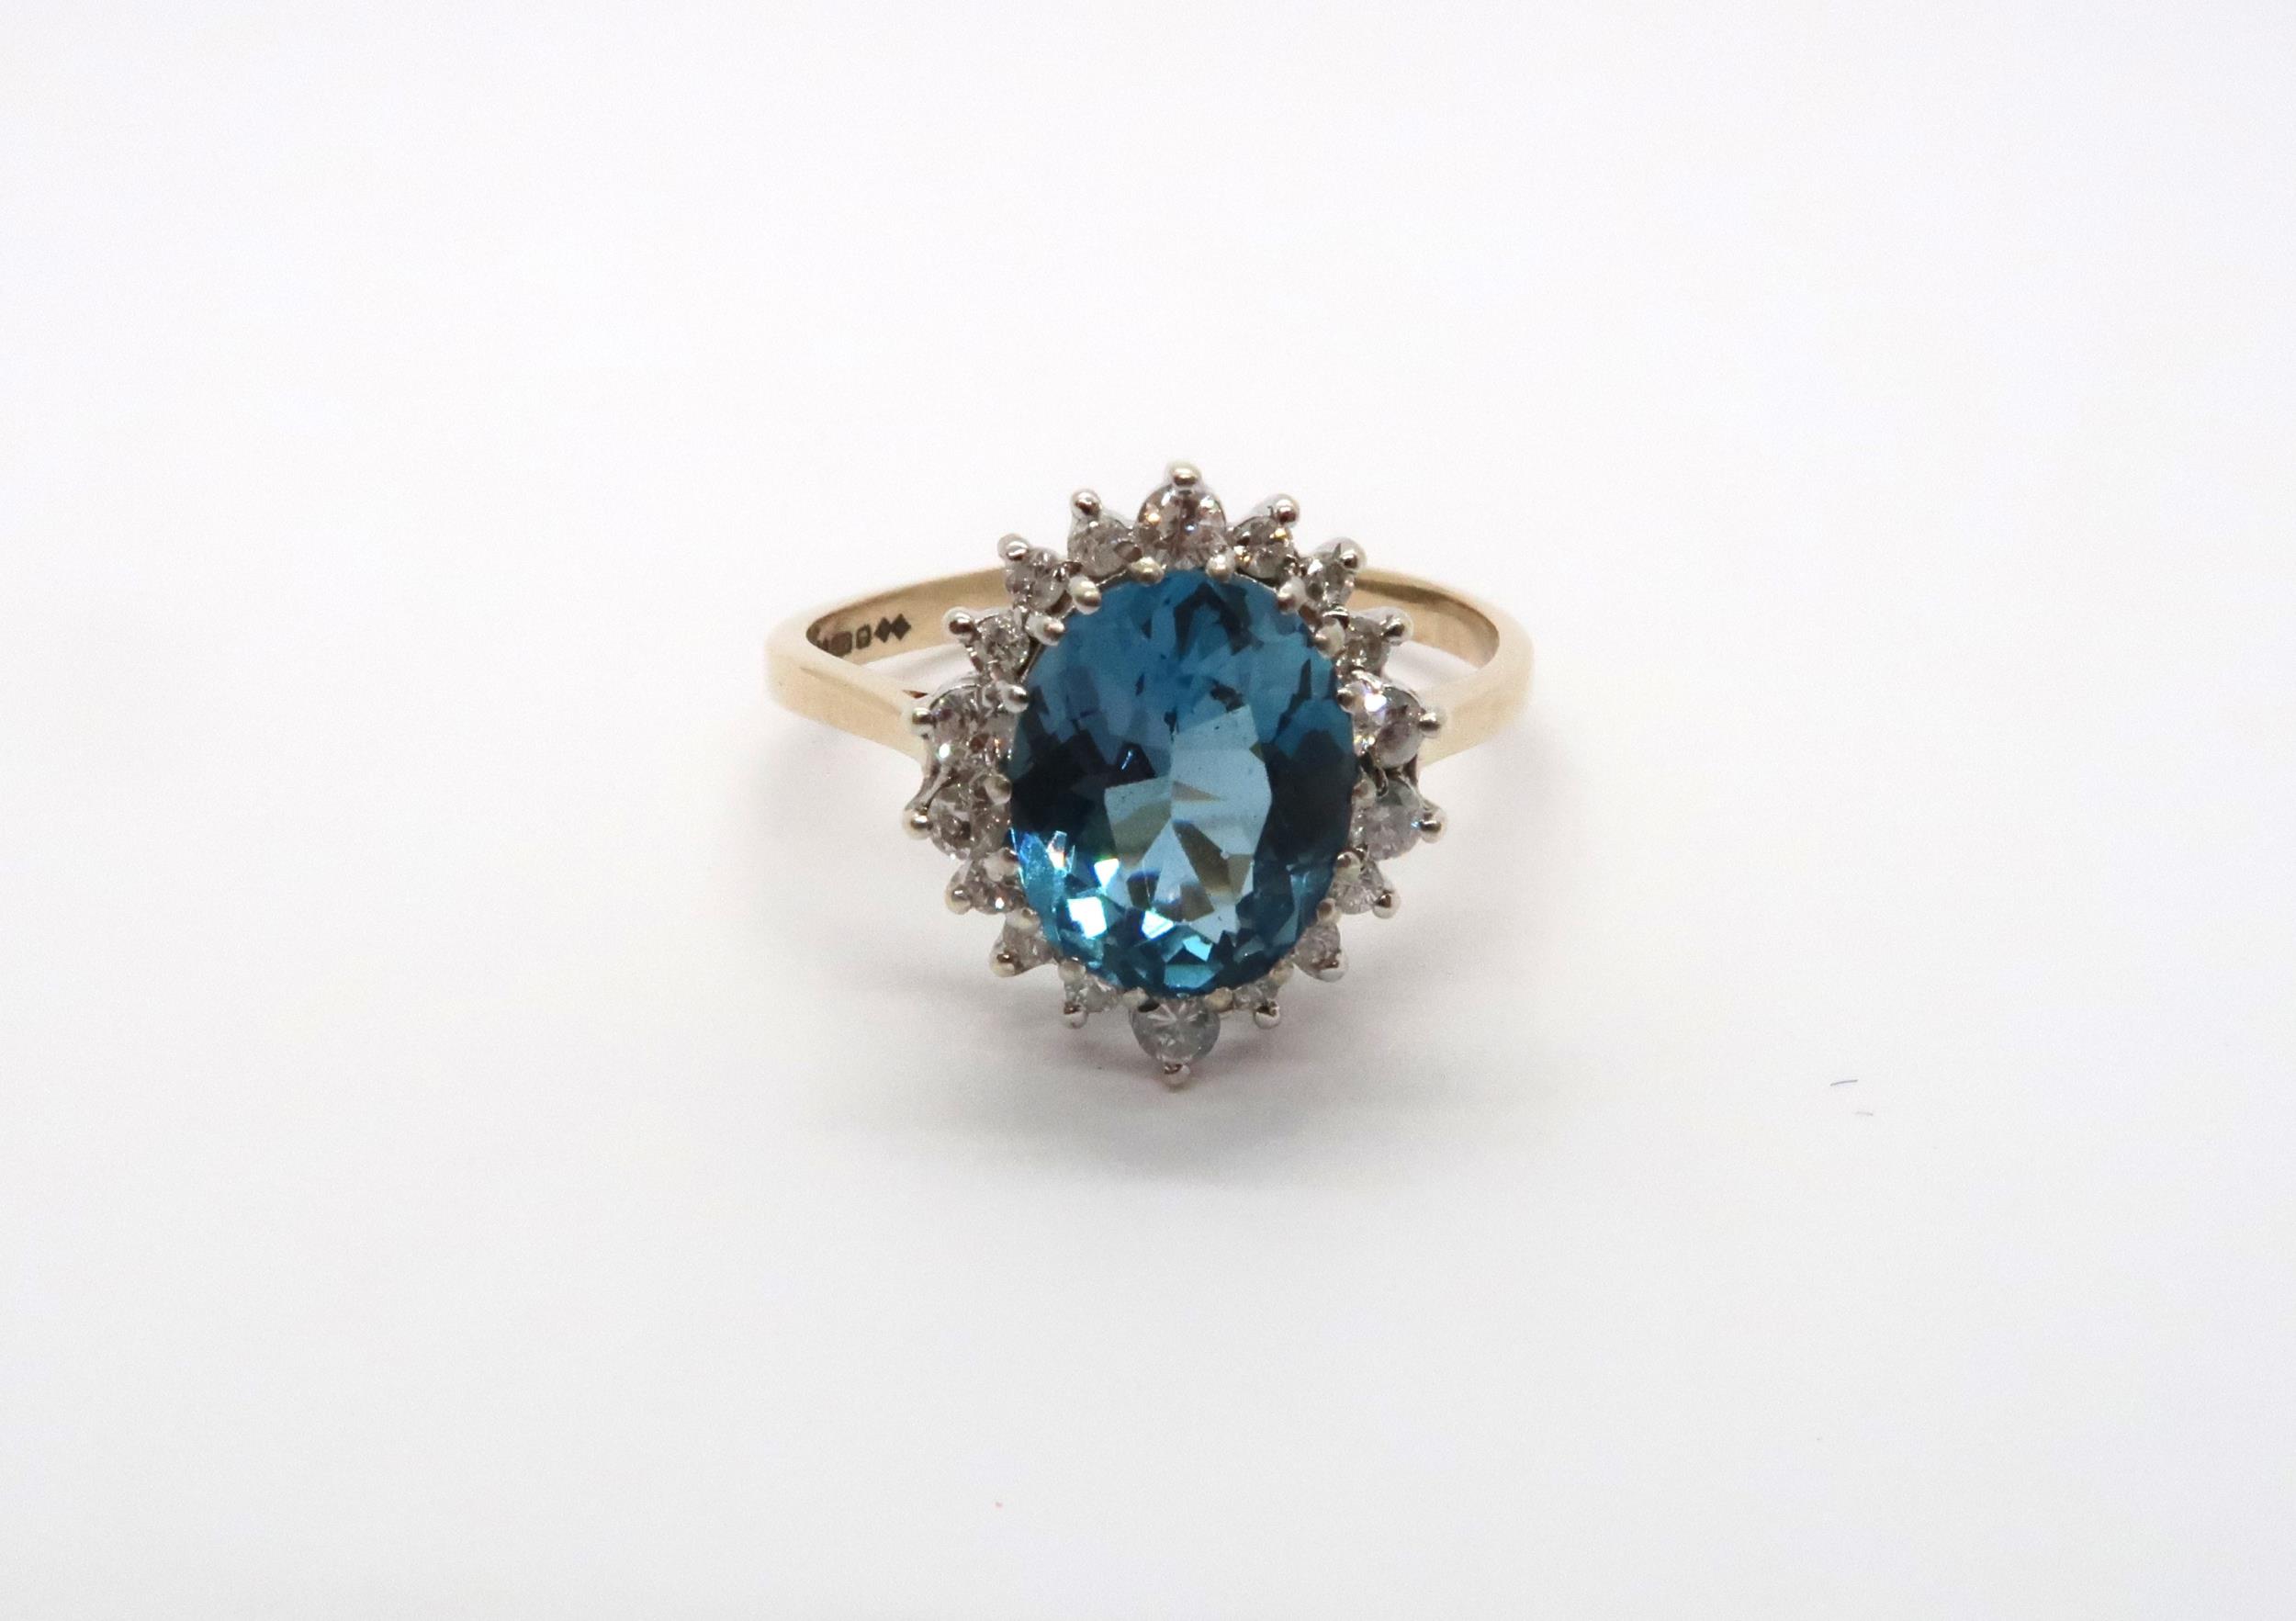 A 9ct yellow gold blue topaz and diamond ring, topaz is a good colour, diamonds bright and lively,